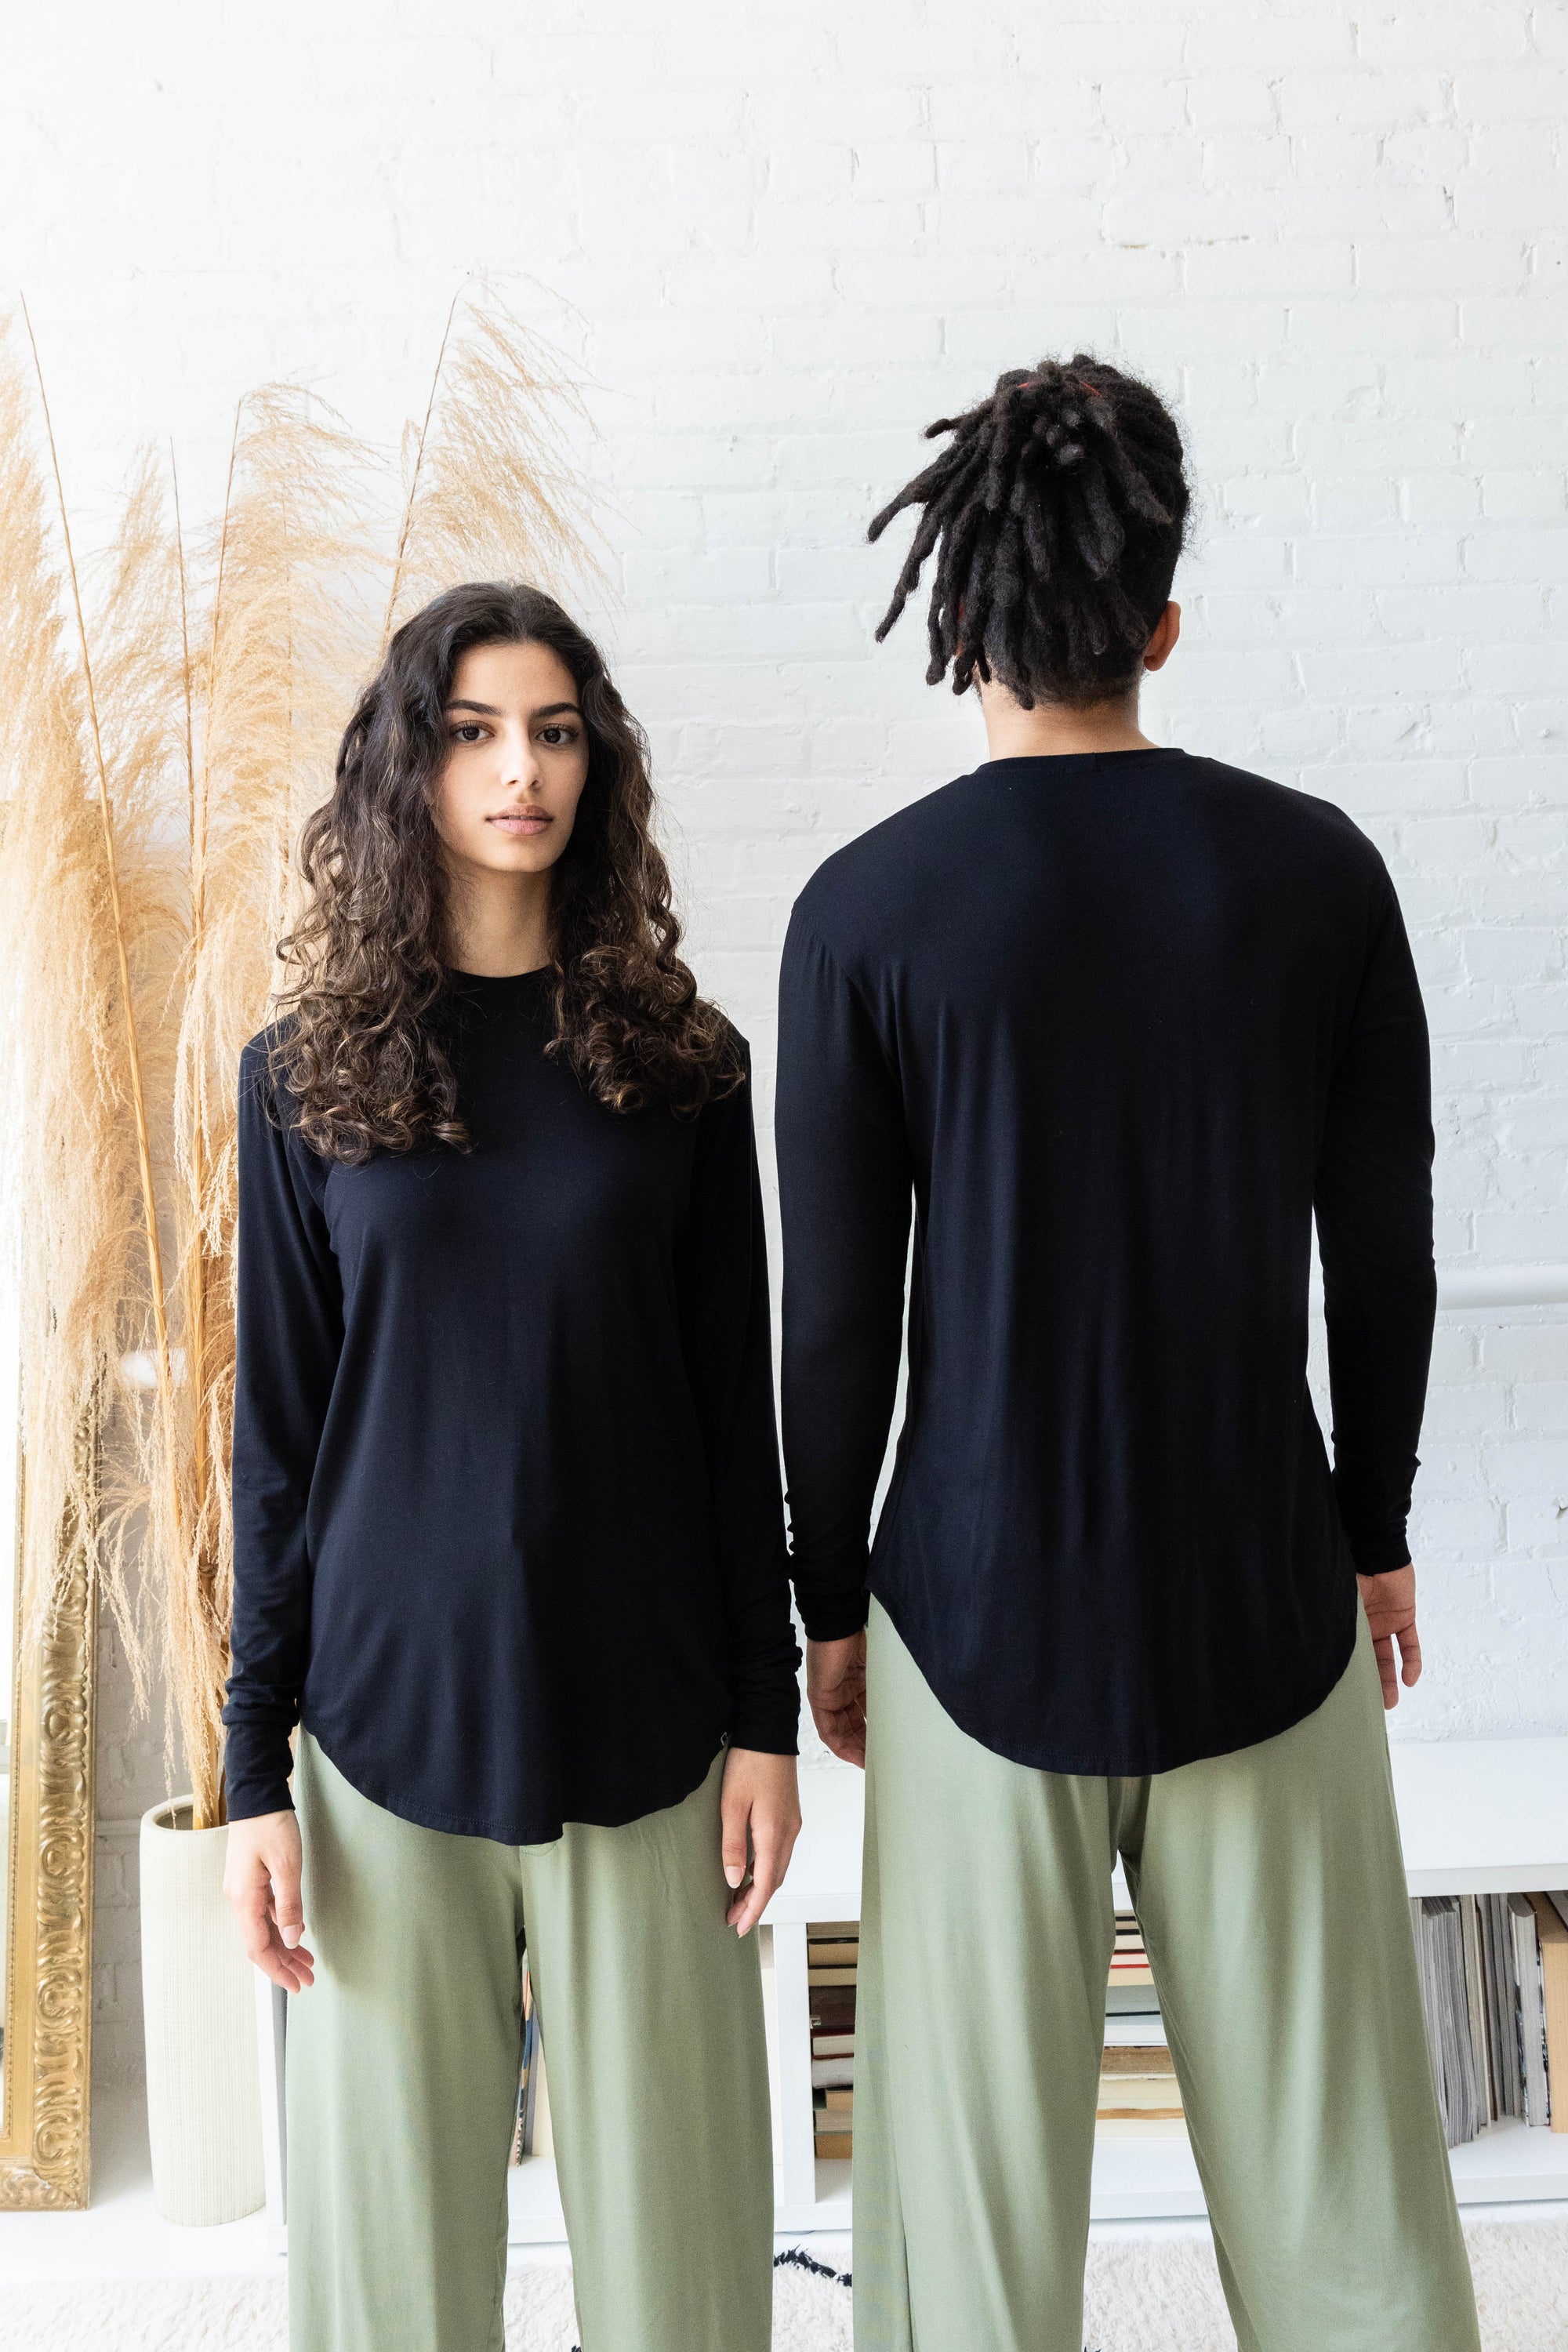 The Long Sleeve - Black by Cassandra Elizabeth is an ethically made, minimalist wardrobe essential, and is the epitome of quiet luxury. 